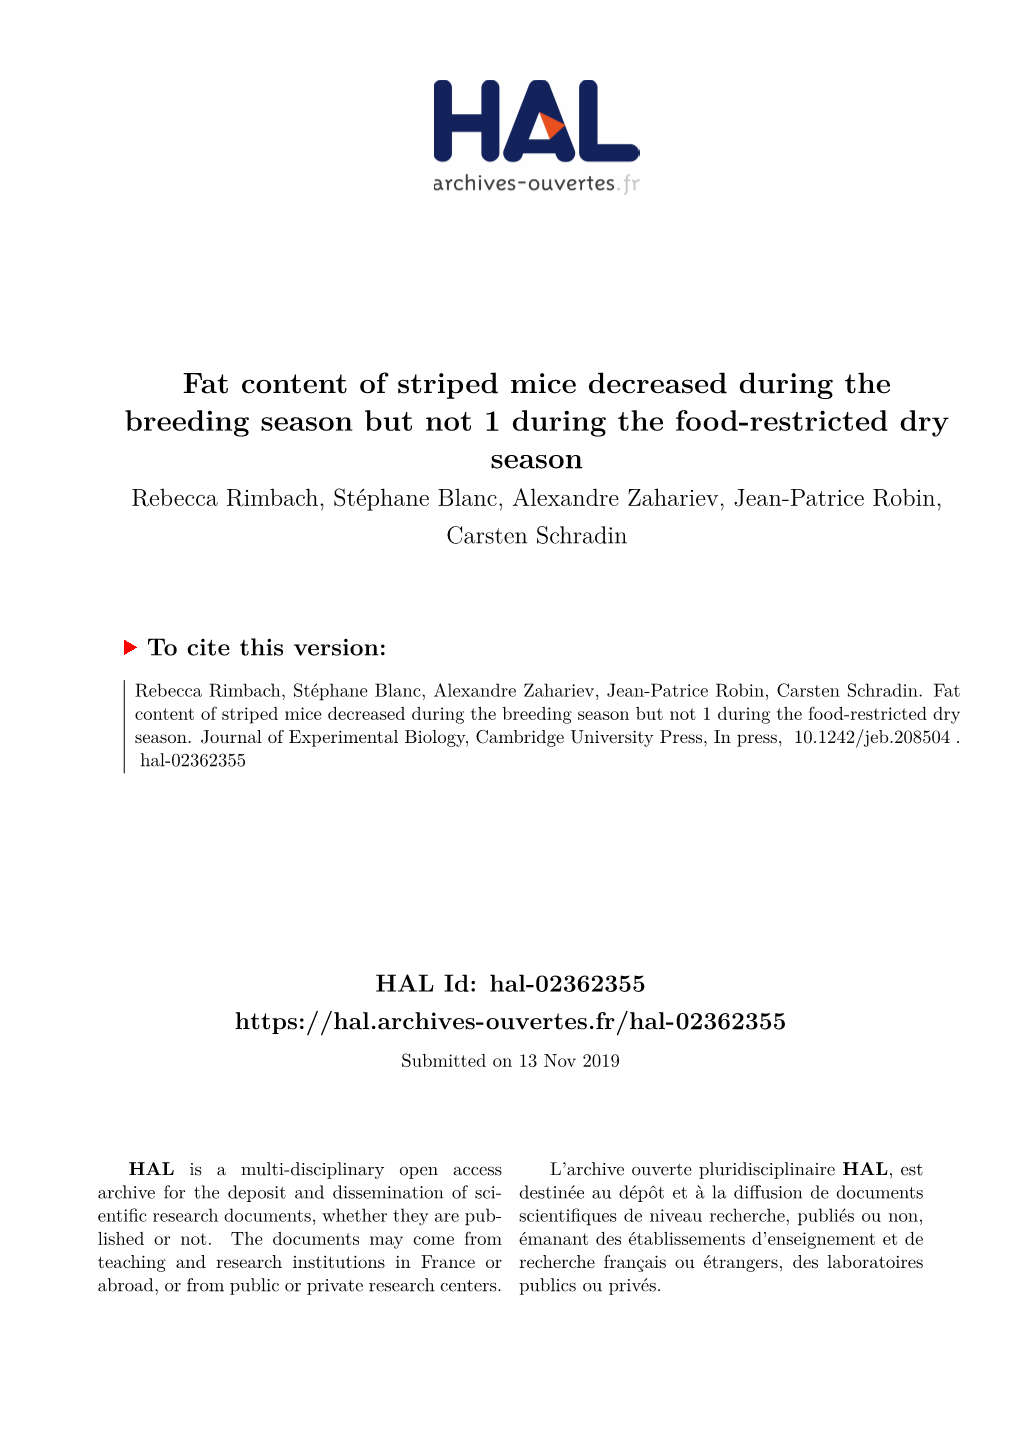 Fat Content of Striped Mice Decreased During the Breeding Season but Not 1 During the Food-Restricted Dry Season